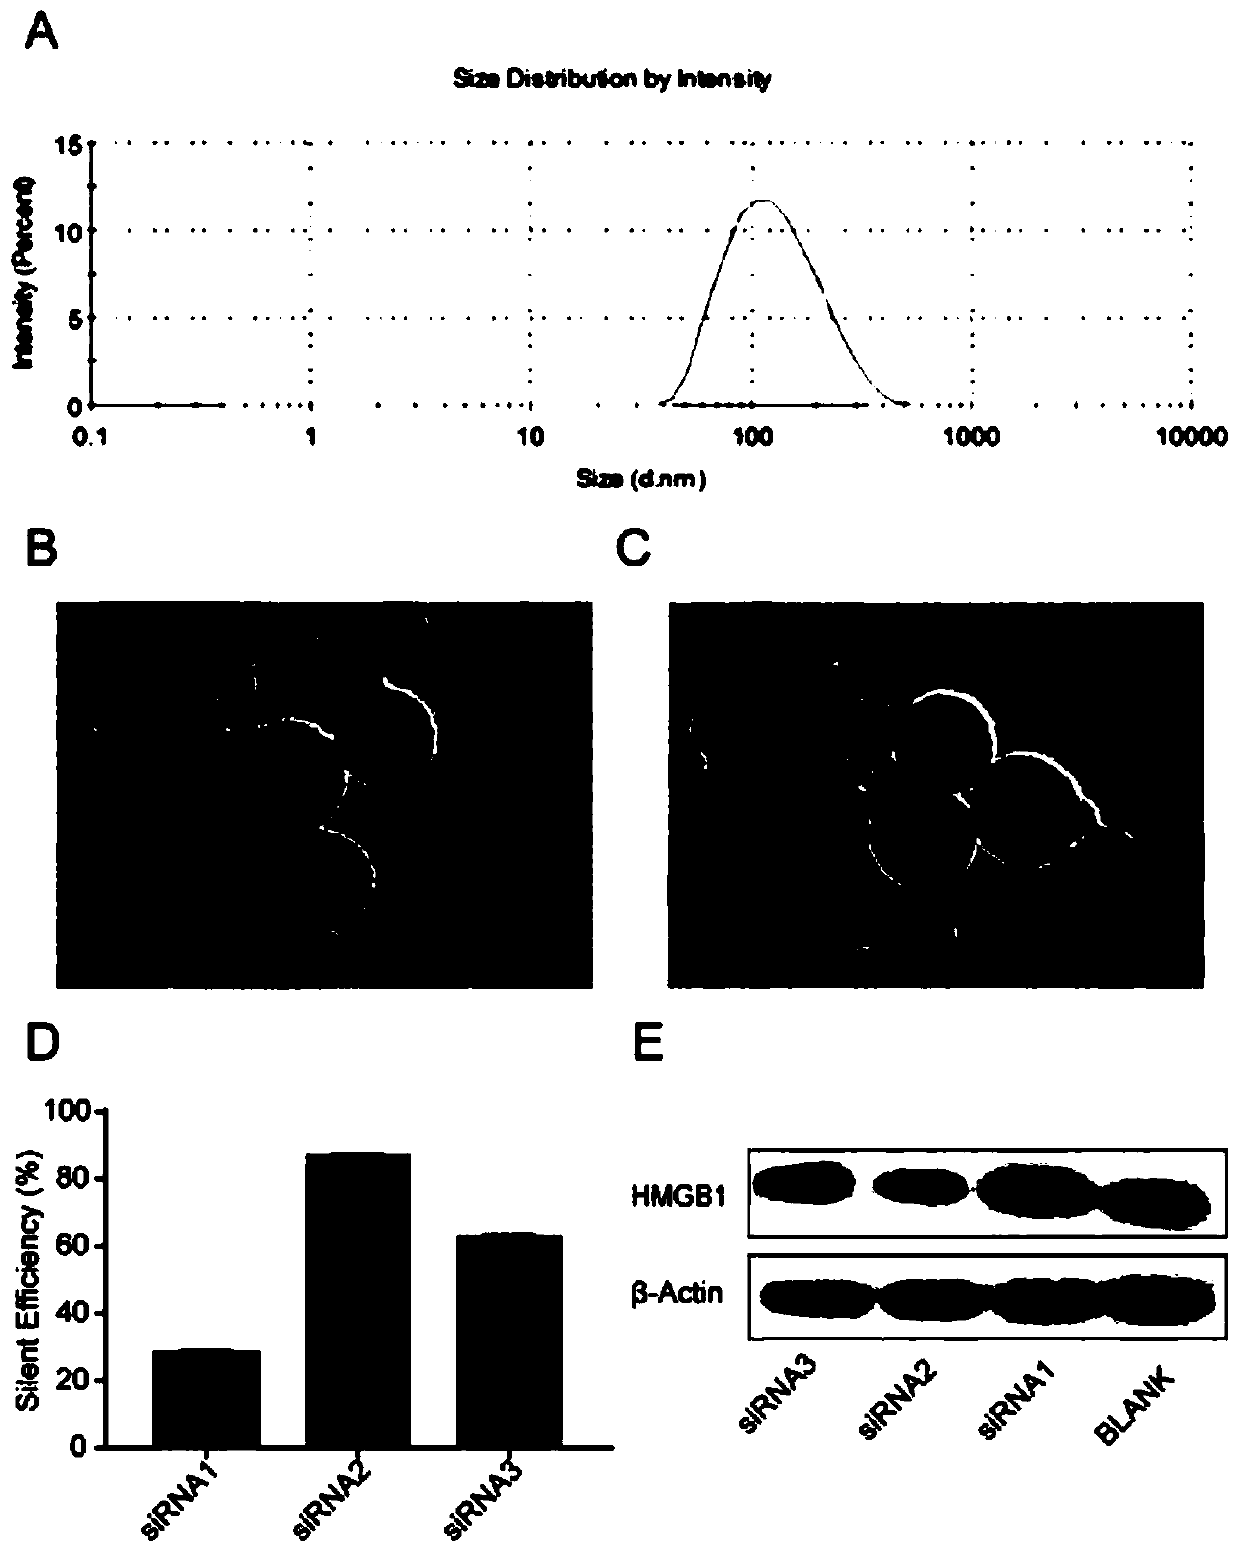 siRNA for inhibiting HMGB1 gene, stable nucleic acid lipid nanoparticle containing siRNA, and application of siRNA and stable nucleic acid lipid nanoparticle